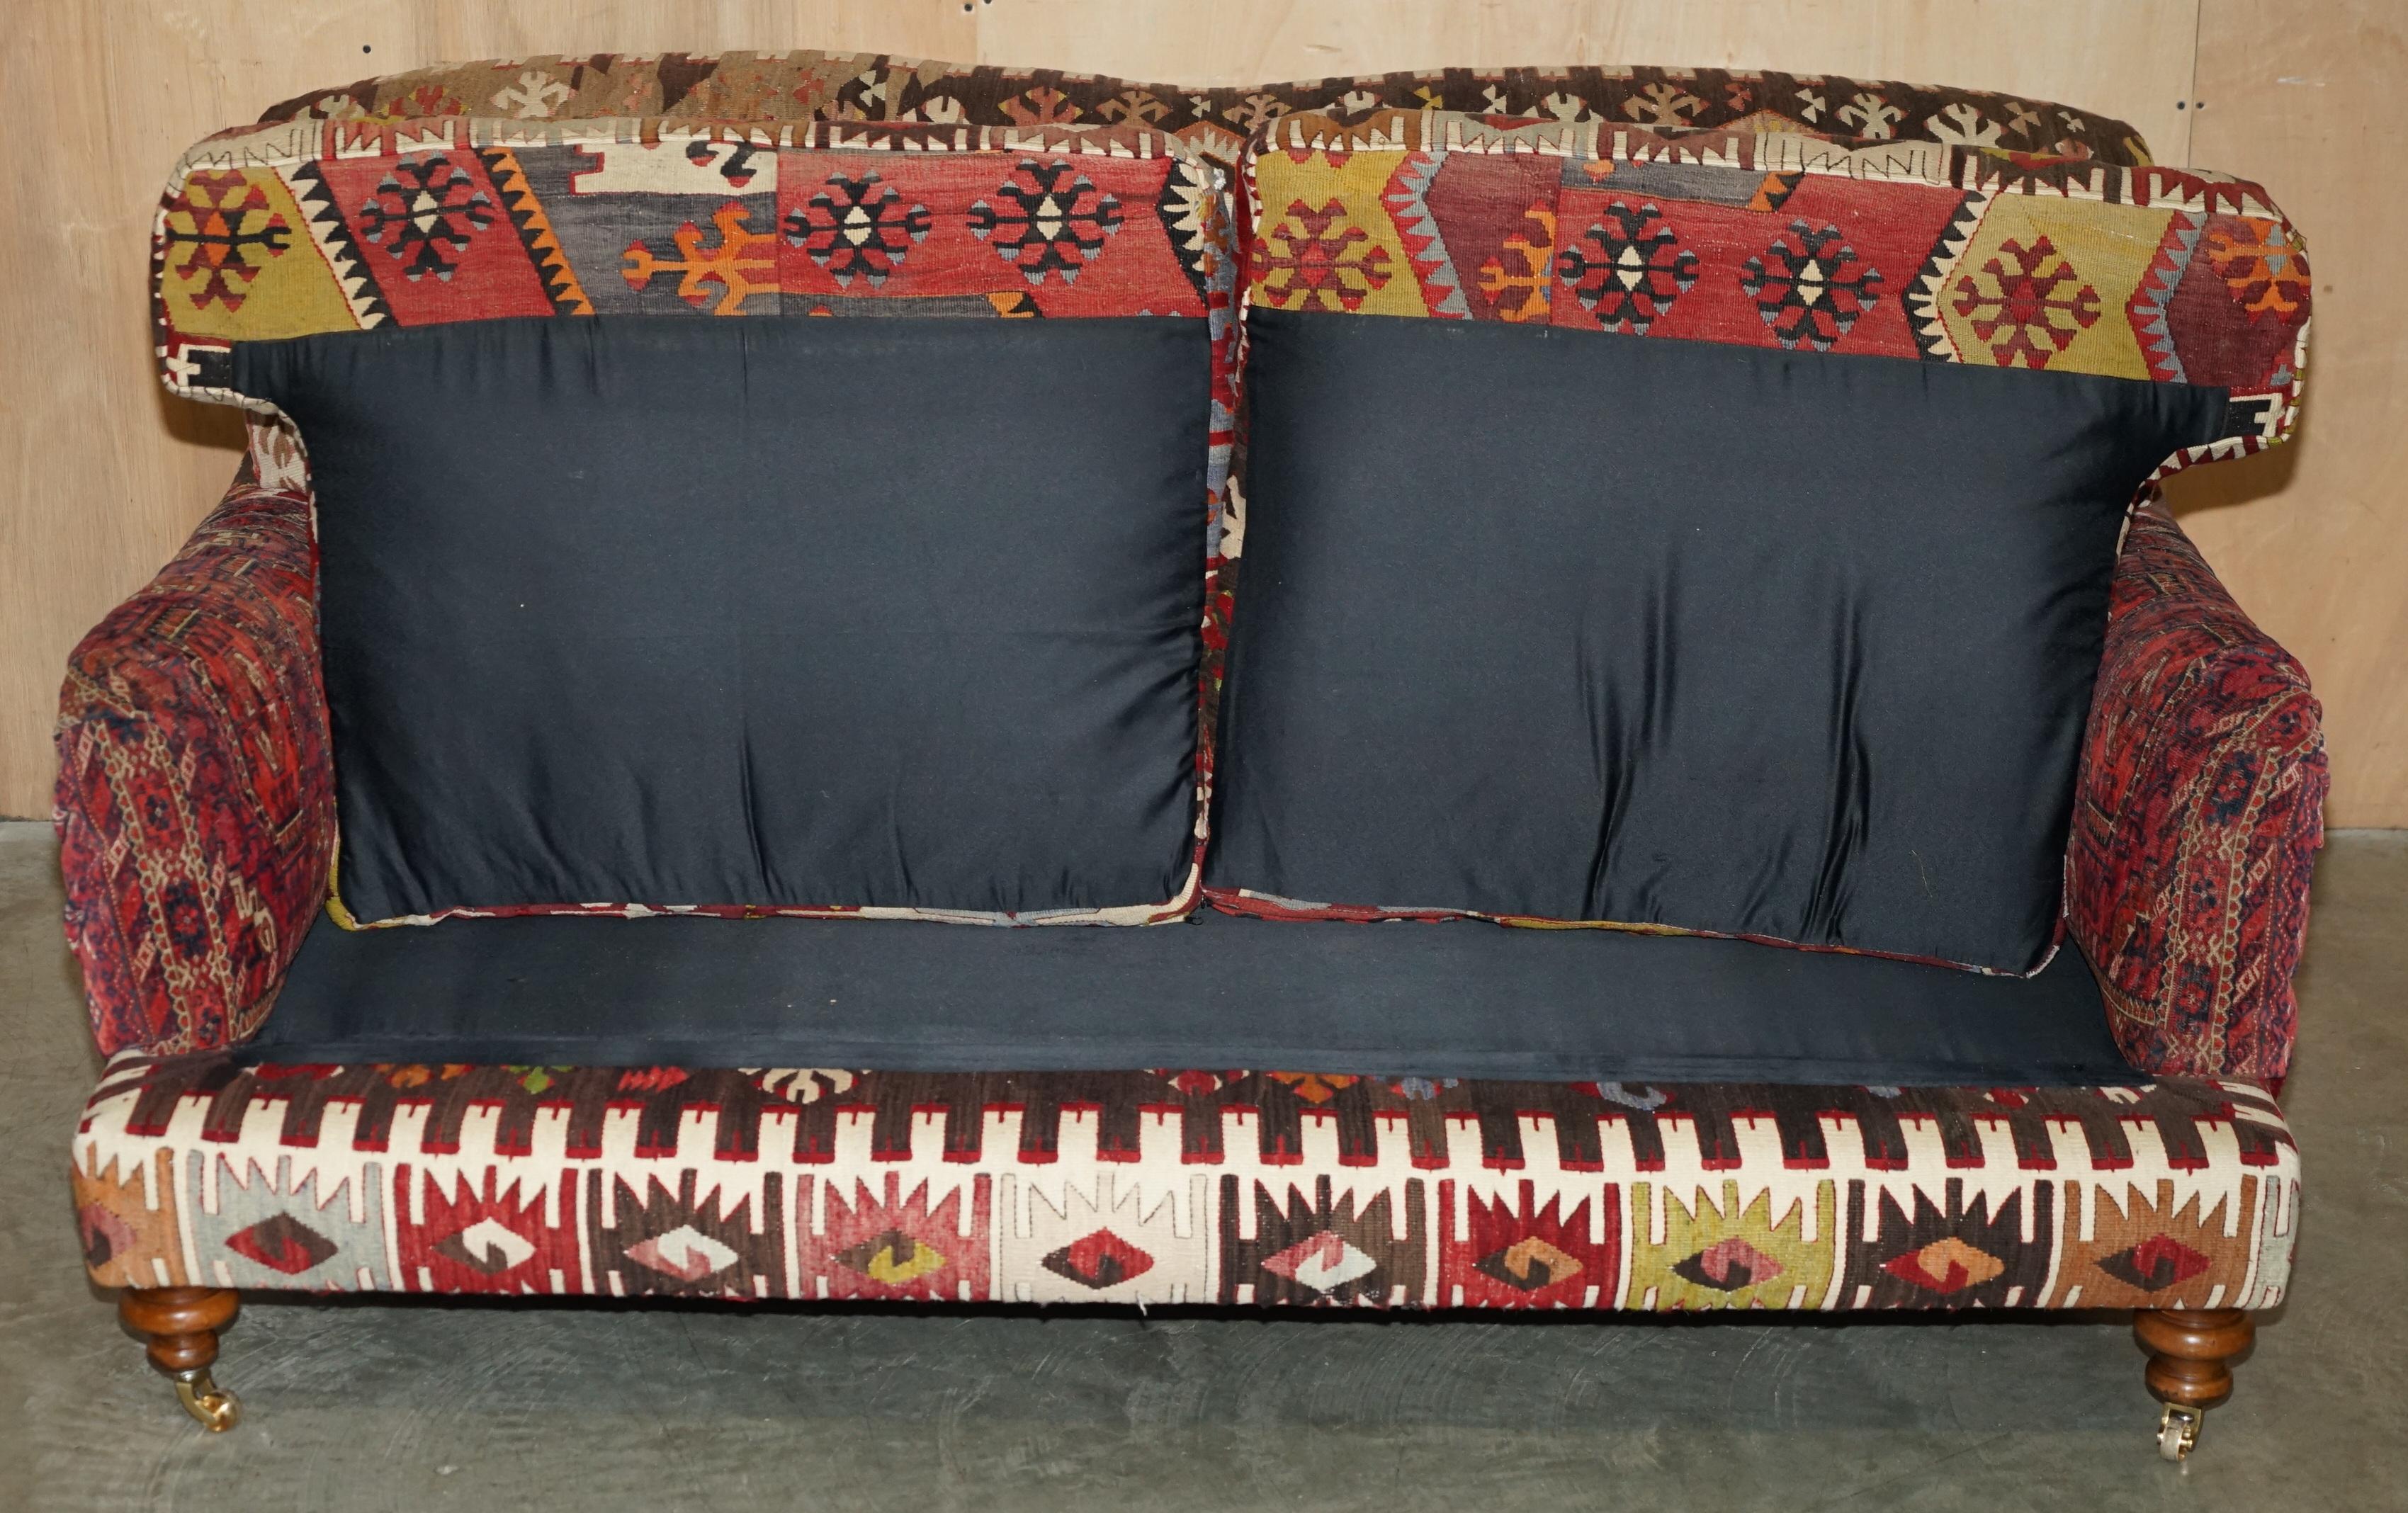 FINE ViNTAGE GEORGE SMITH HOWARD & SON'S STYLE KILIM UPHOLSTERED TWO SEATER SOFA 10